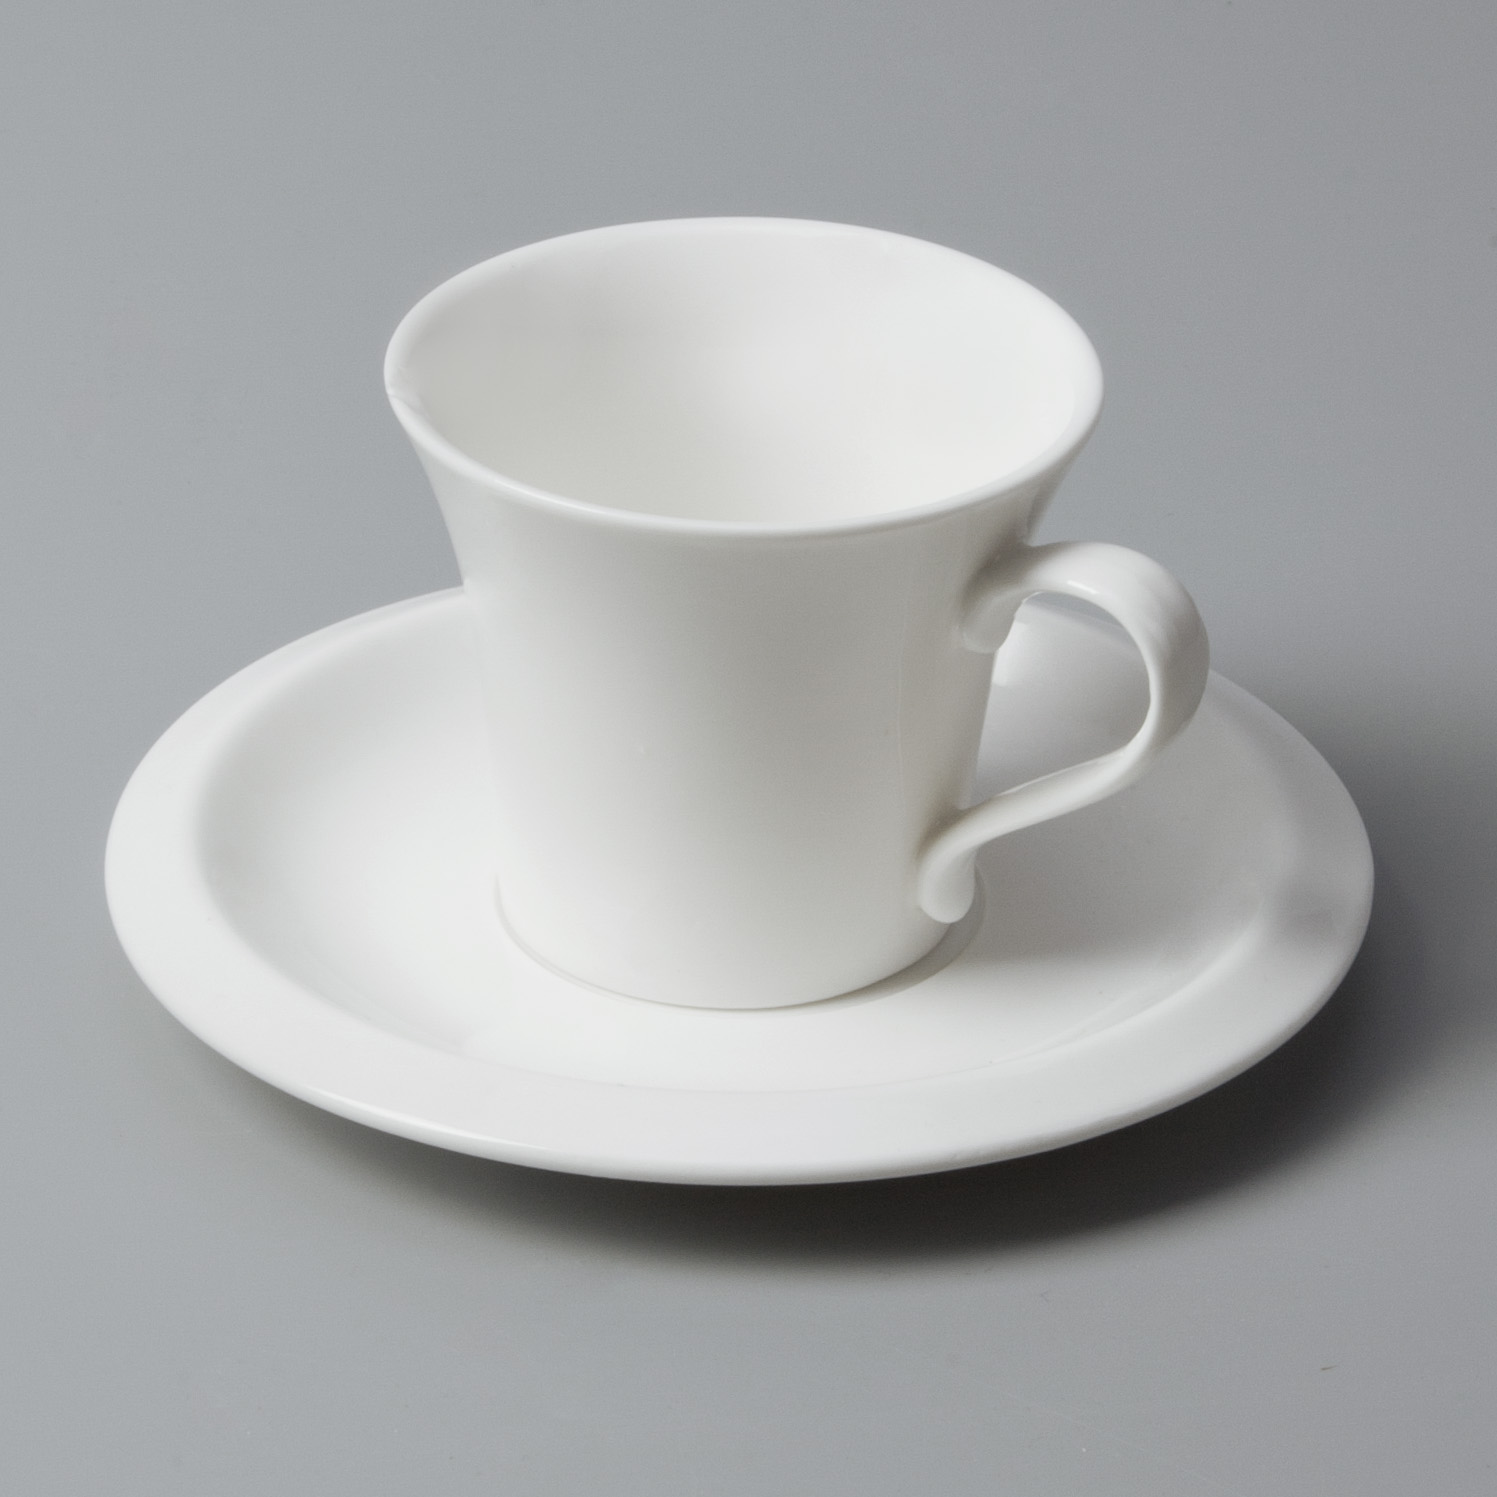 Two Eight best porcelain dinnerware in the world for business for bistro-6